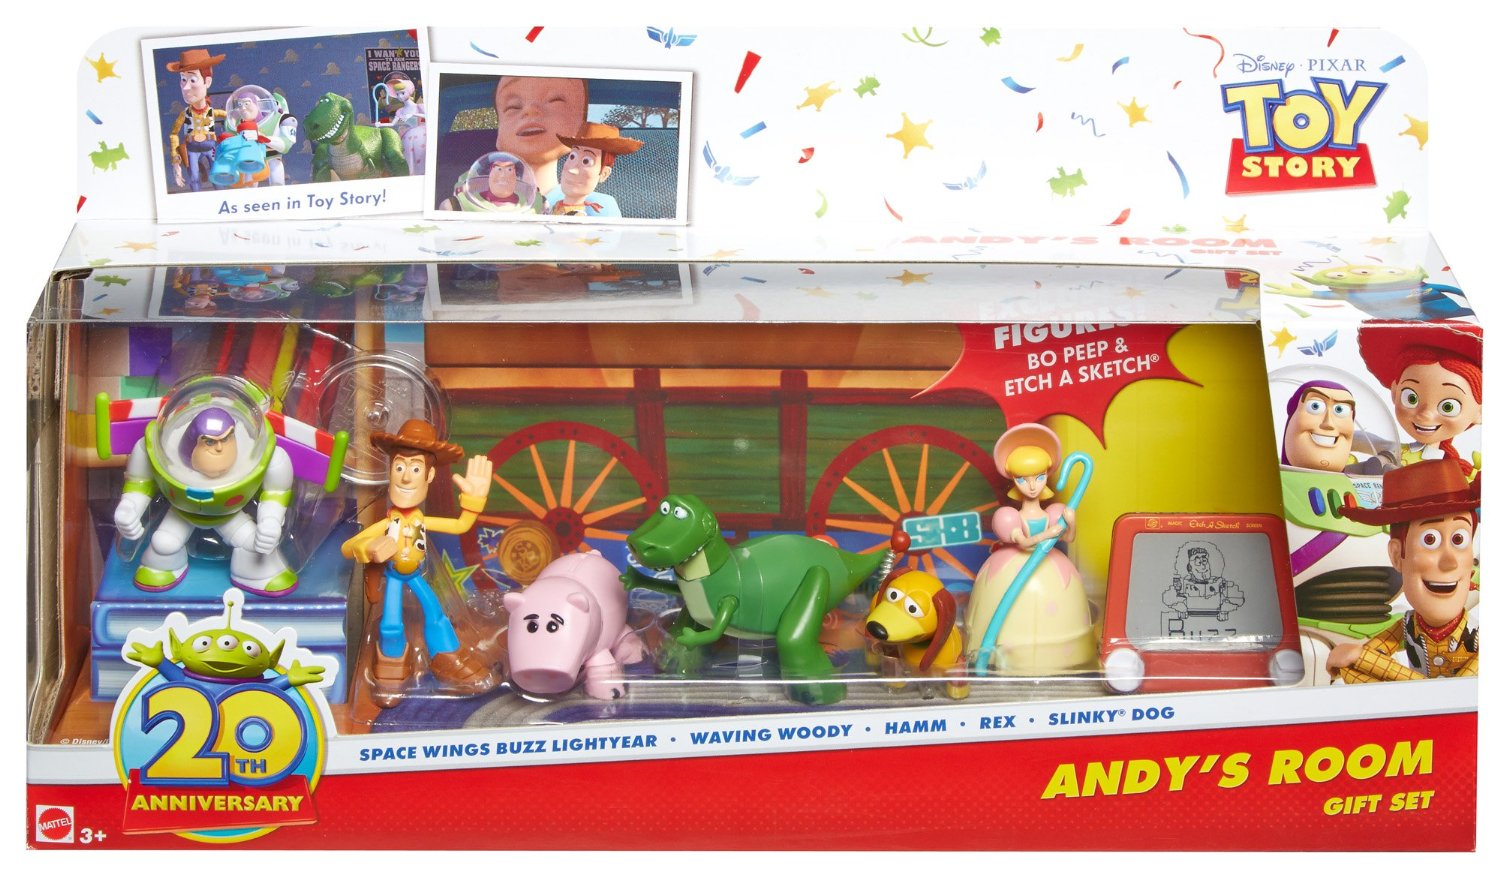 Toy Story 20th Anniversary Toy Review - LaughingPlace.com